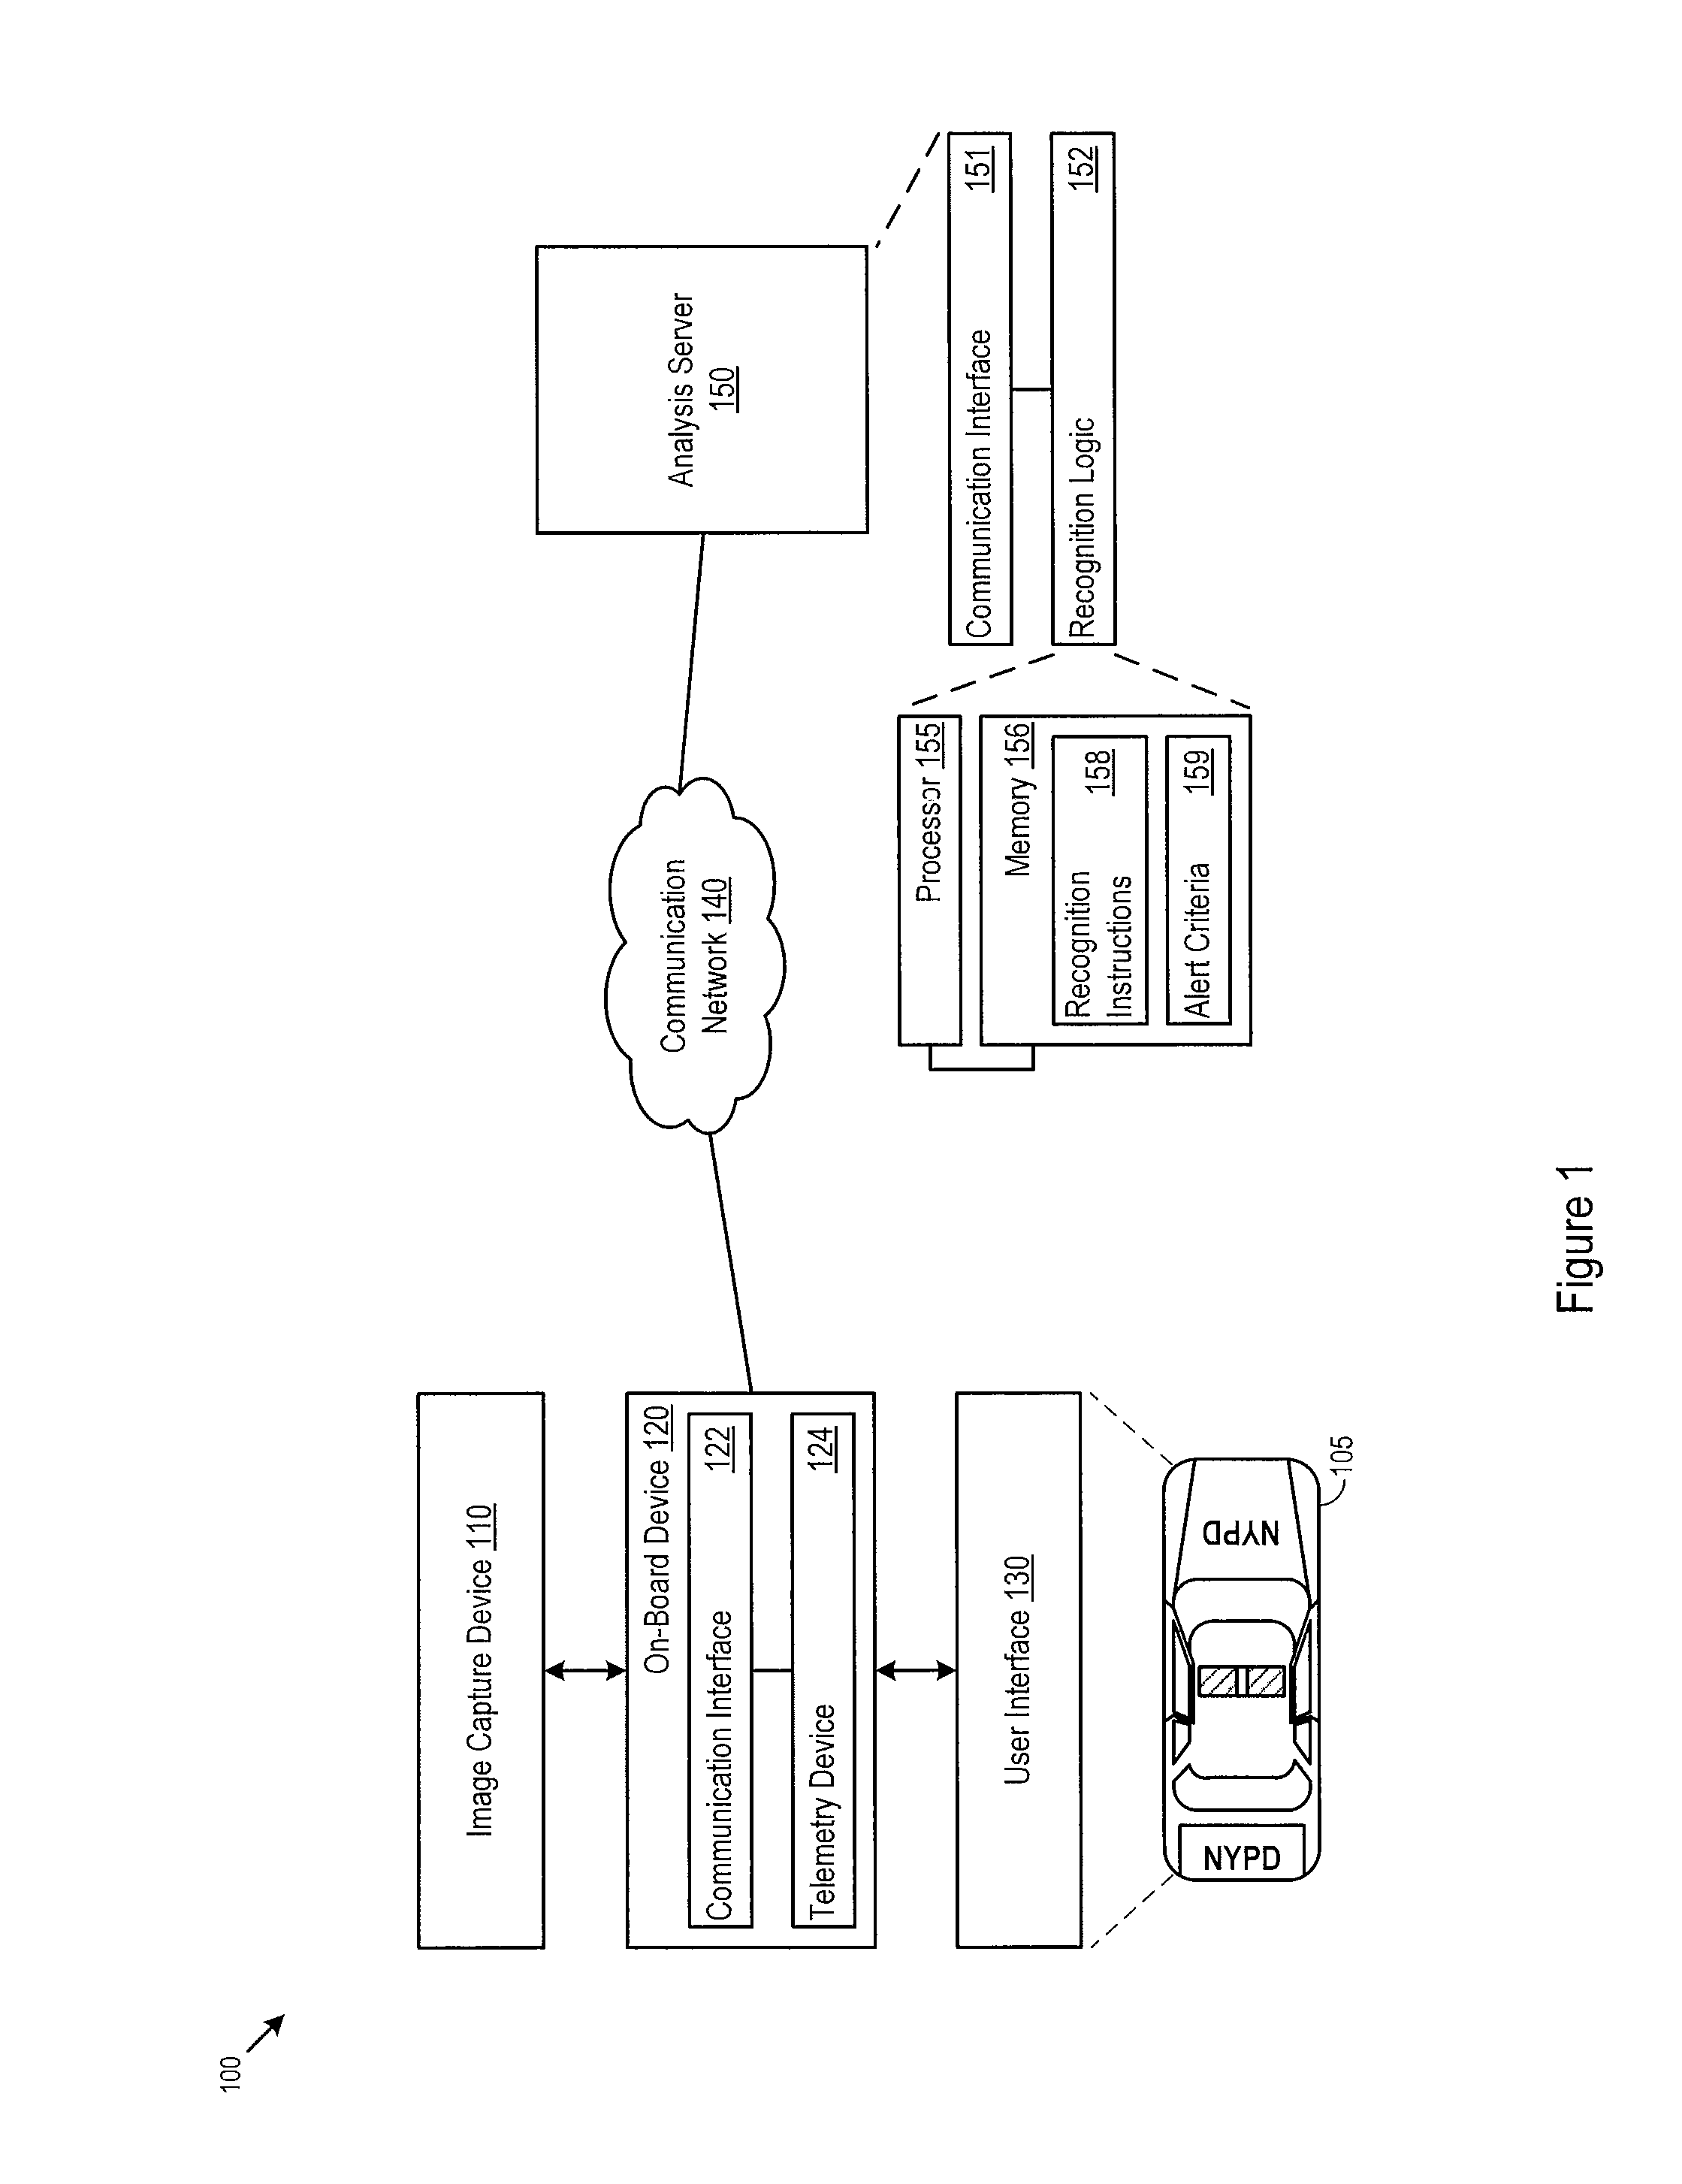 License plate recognition system and location forecasting